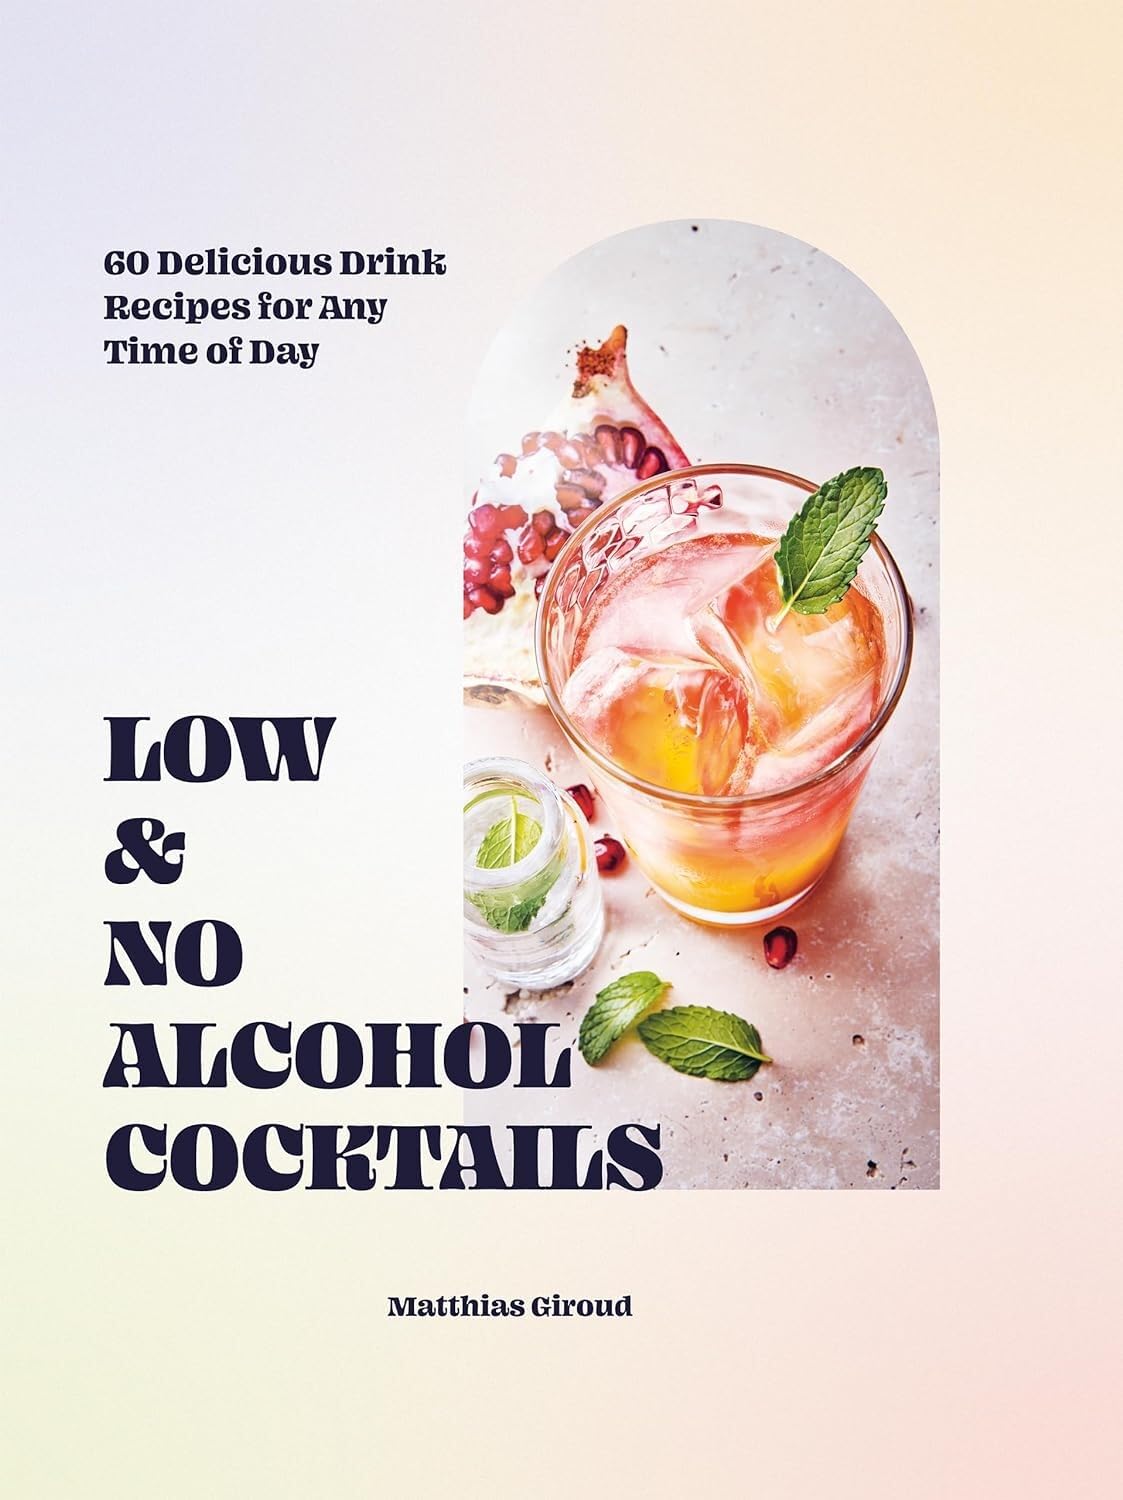 Low & No-alcohol Cocktails: 60 Delicious Drink Recipes for Any Time of Day (Matthias Giroud)